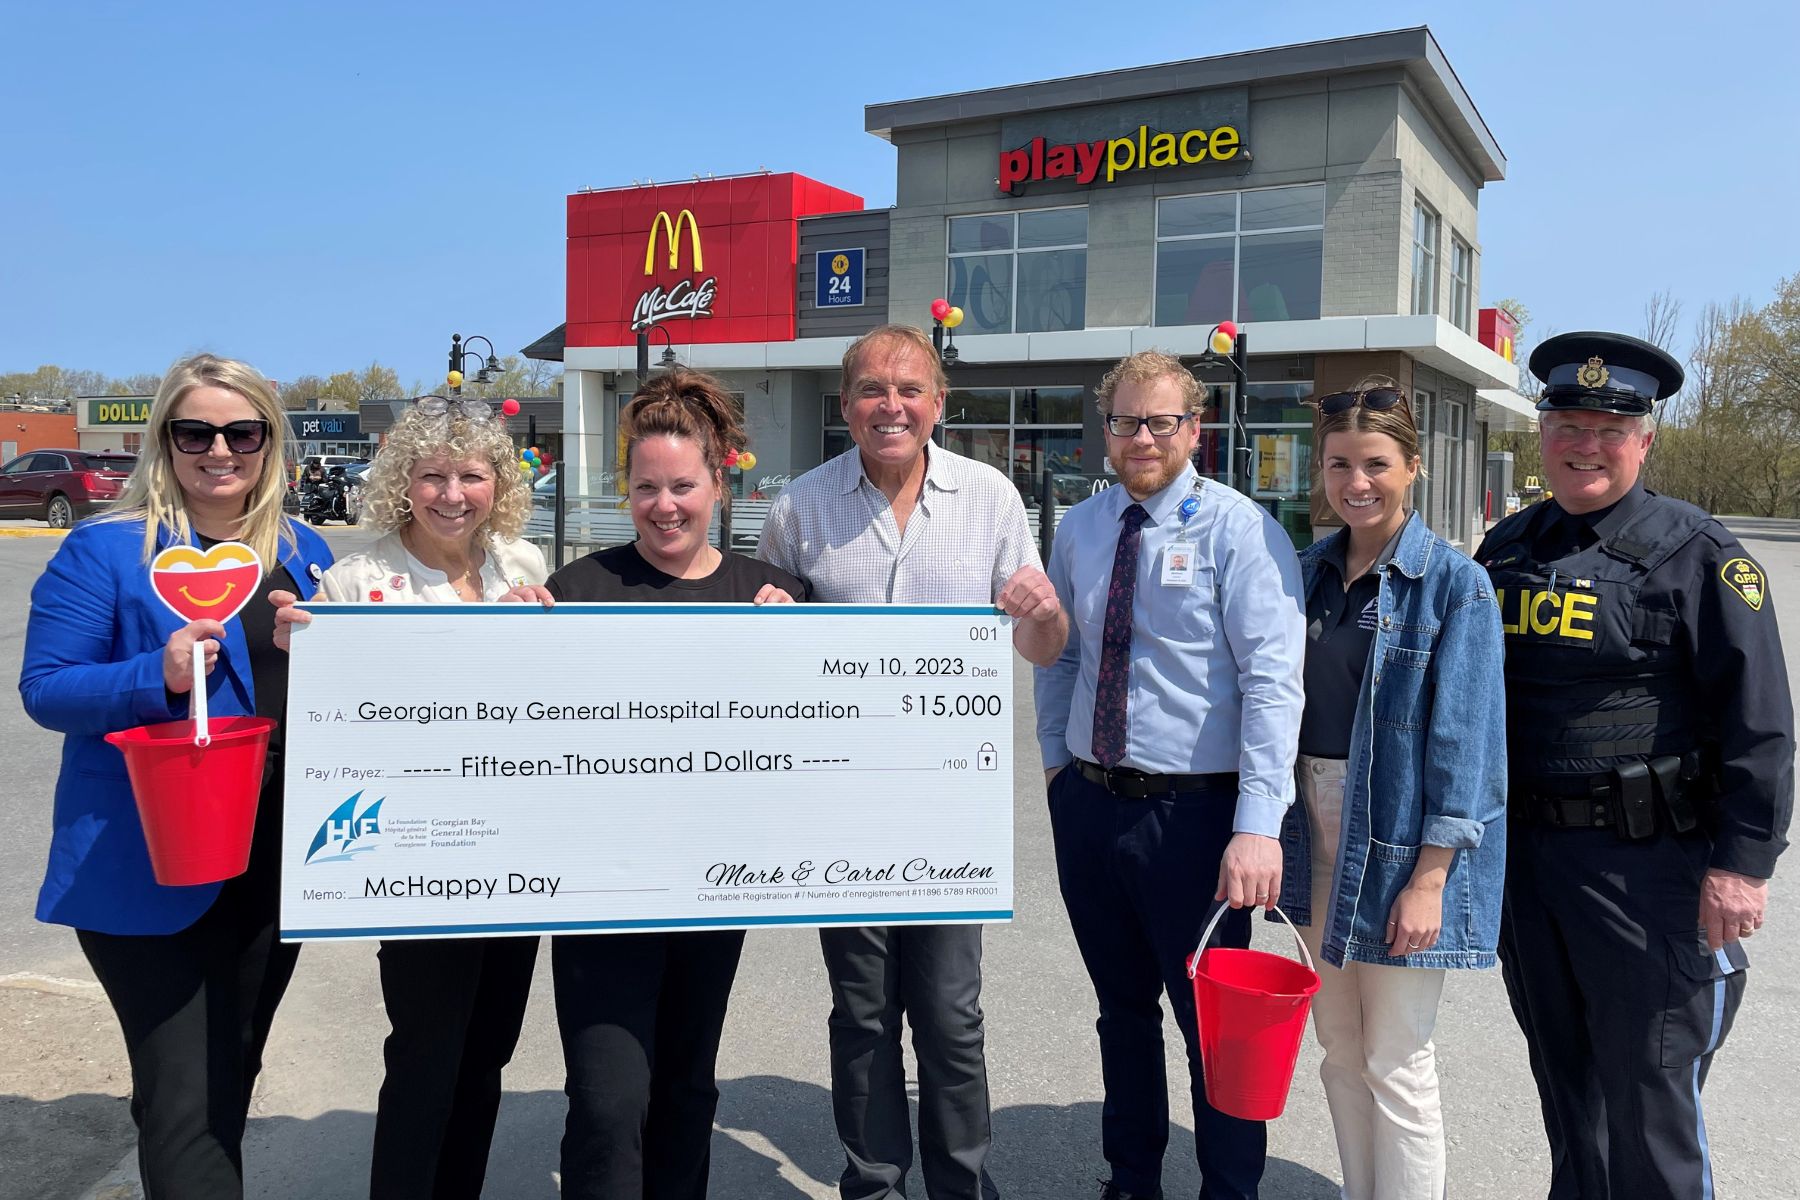 Four woman, two men and a male police officer stand outside the Midland McDonalds restaurant with a cheque for $15,000 from Mark and Carol Cruden - proceeds from McHappy Day.